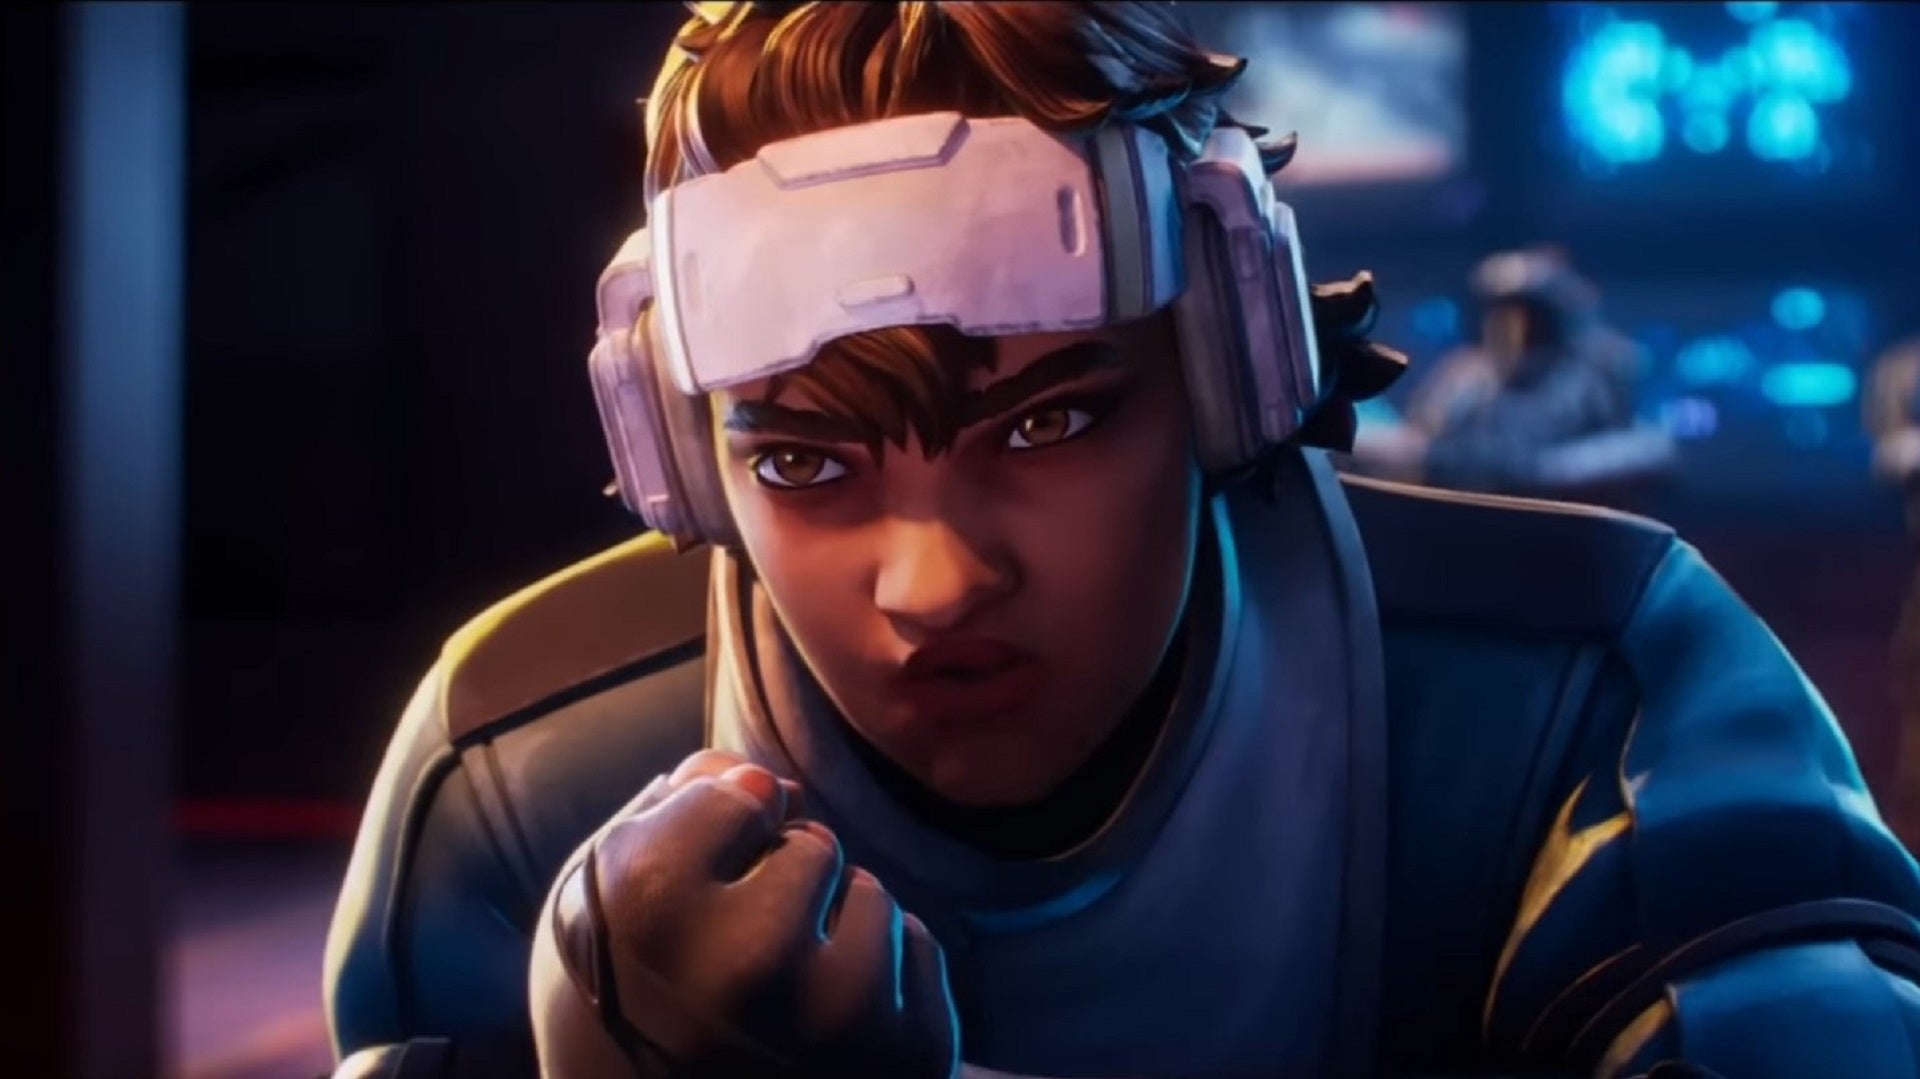 Vantage from the Apex Legends Hunted Launch trailer